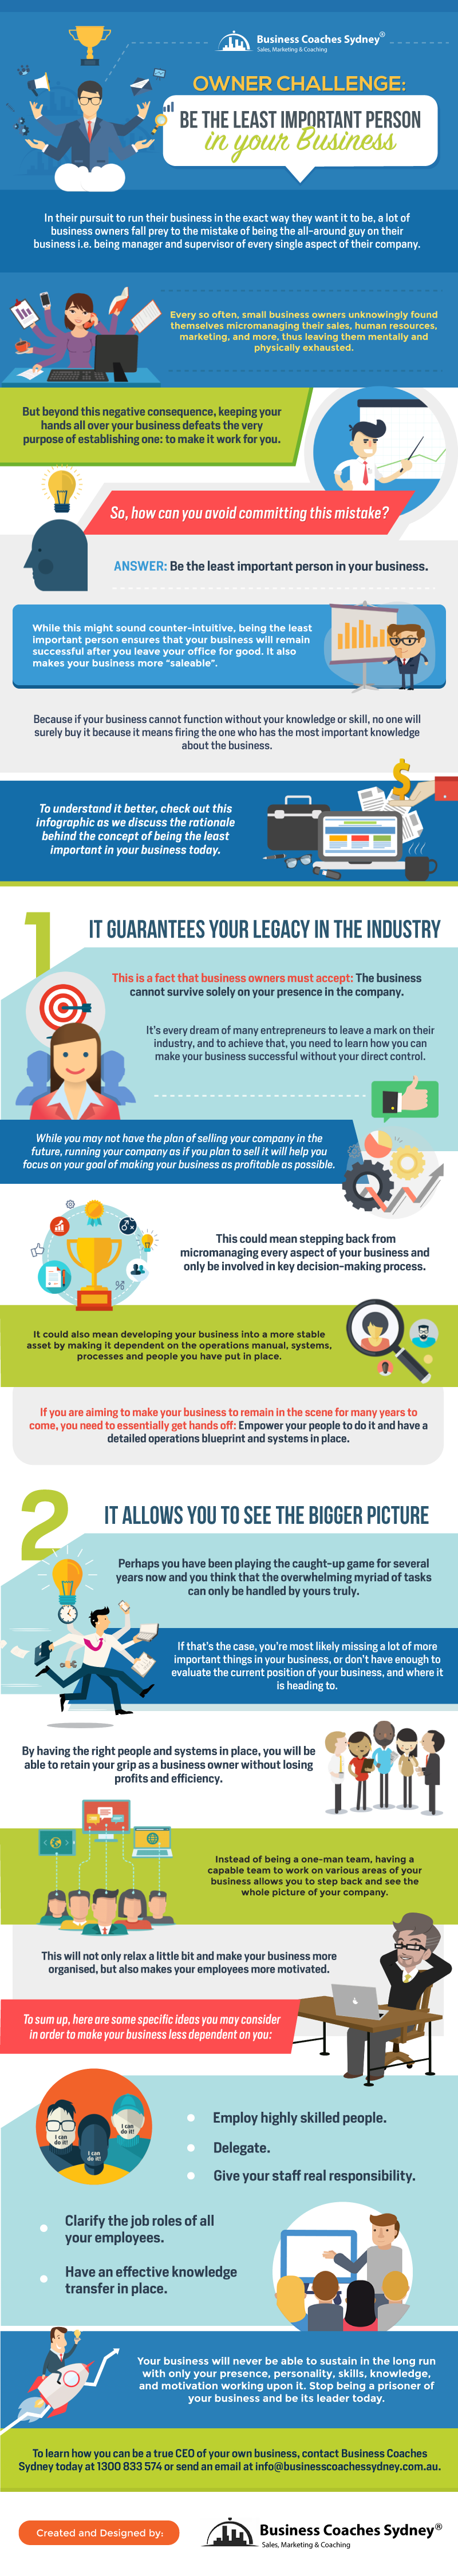 How to Win by Becoming the Least Important Person in Your Business - Infographic